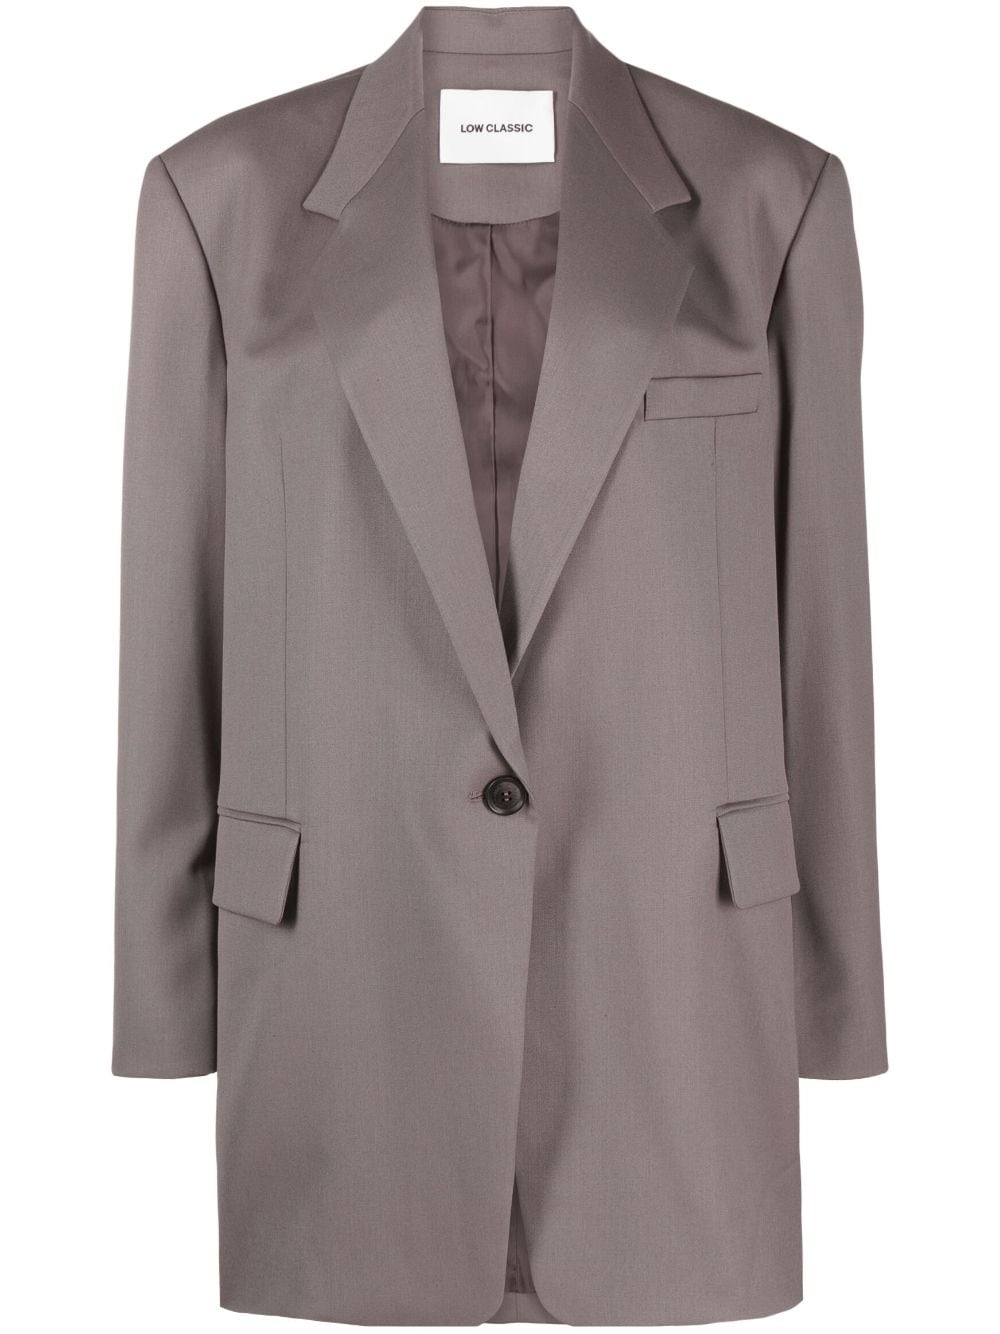 LOW CLASSIC SINGLE-BREASTED TAILORED BLAZER